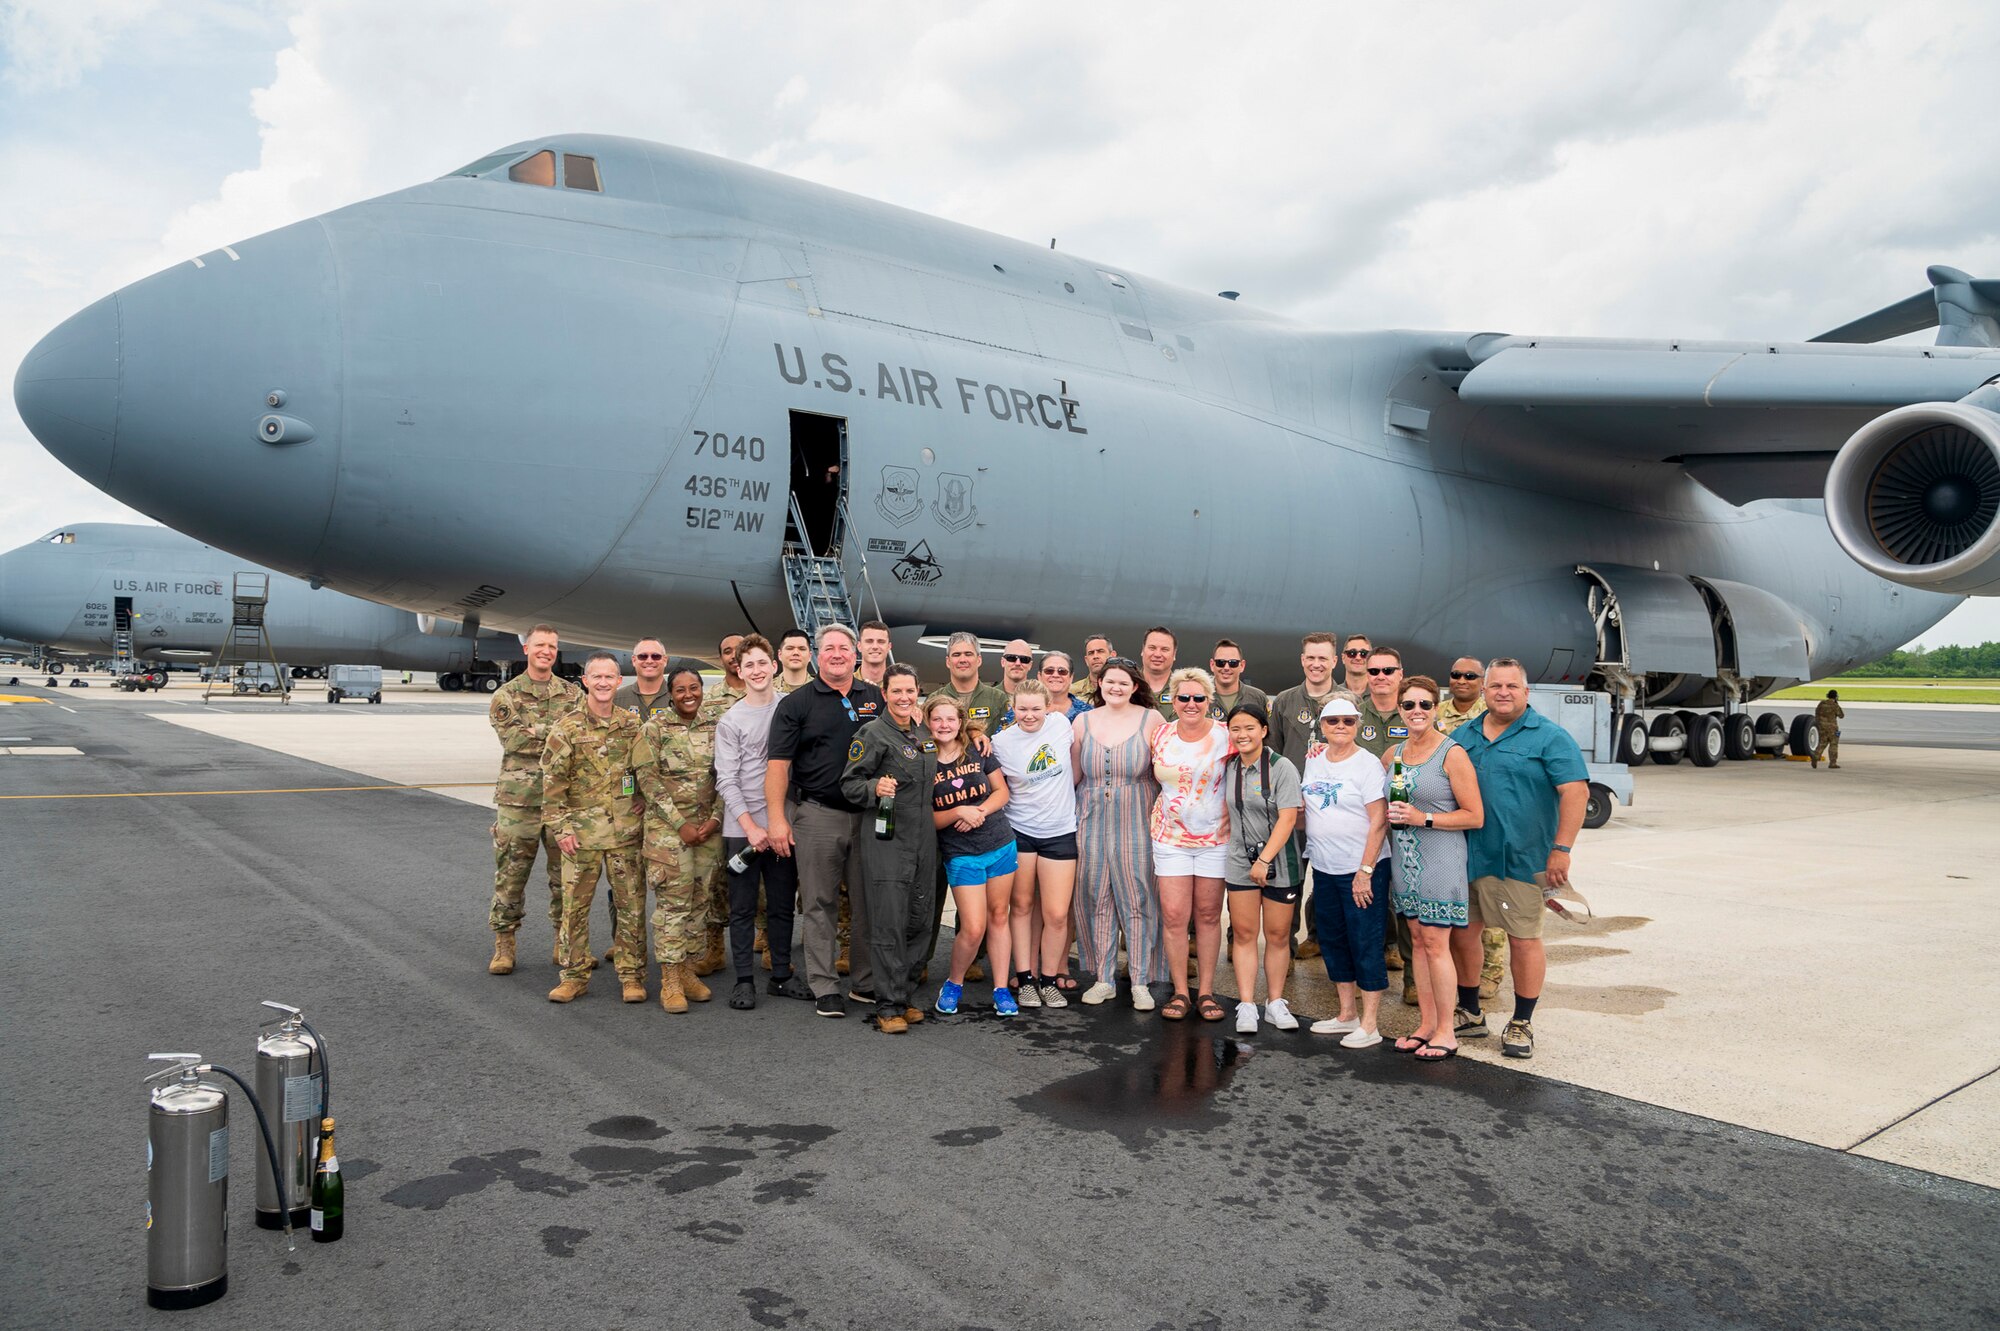 U.S. Air Force Lt. Col. Anita West-Werner, 512th Operations Group, Dover Air Force Base, Delaware, poses with air crew, family, and friends after her final flight June 7, 2022. West-Werner flew her final flight after 26 years with the 512th AW. West-Werner's next assignment is at the Pentagon in Arlington, Virginia, where she'll be the Individual Mobilization Augmentee to the Director of the Air Force Crisis Action Team. (U.S. Air Force photo by Mauricio Campino)